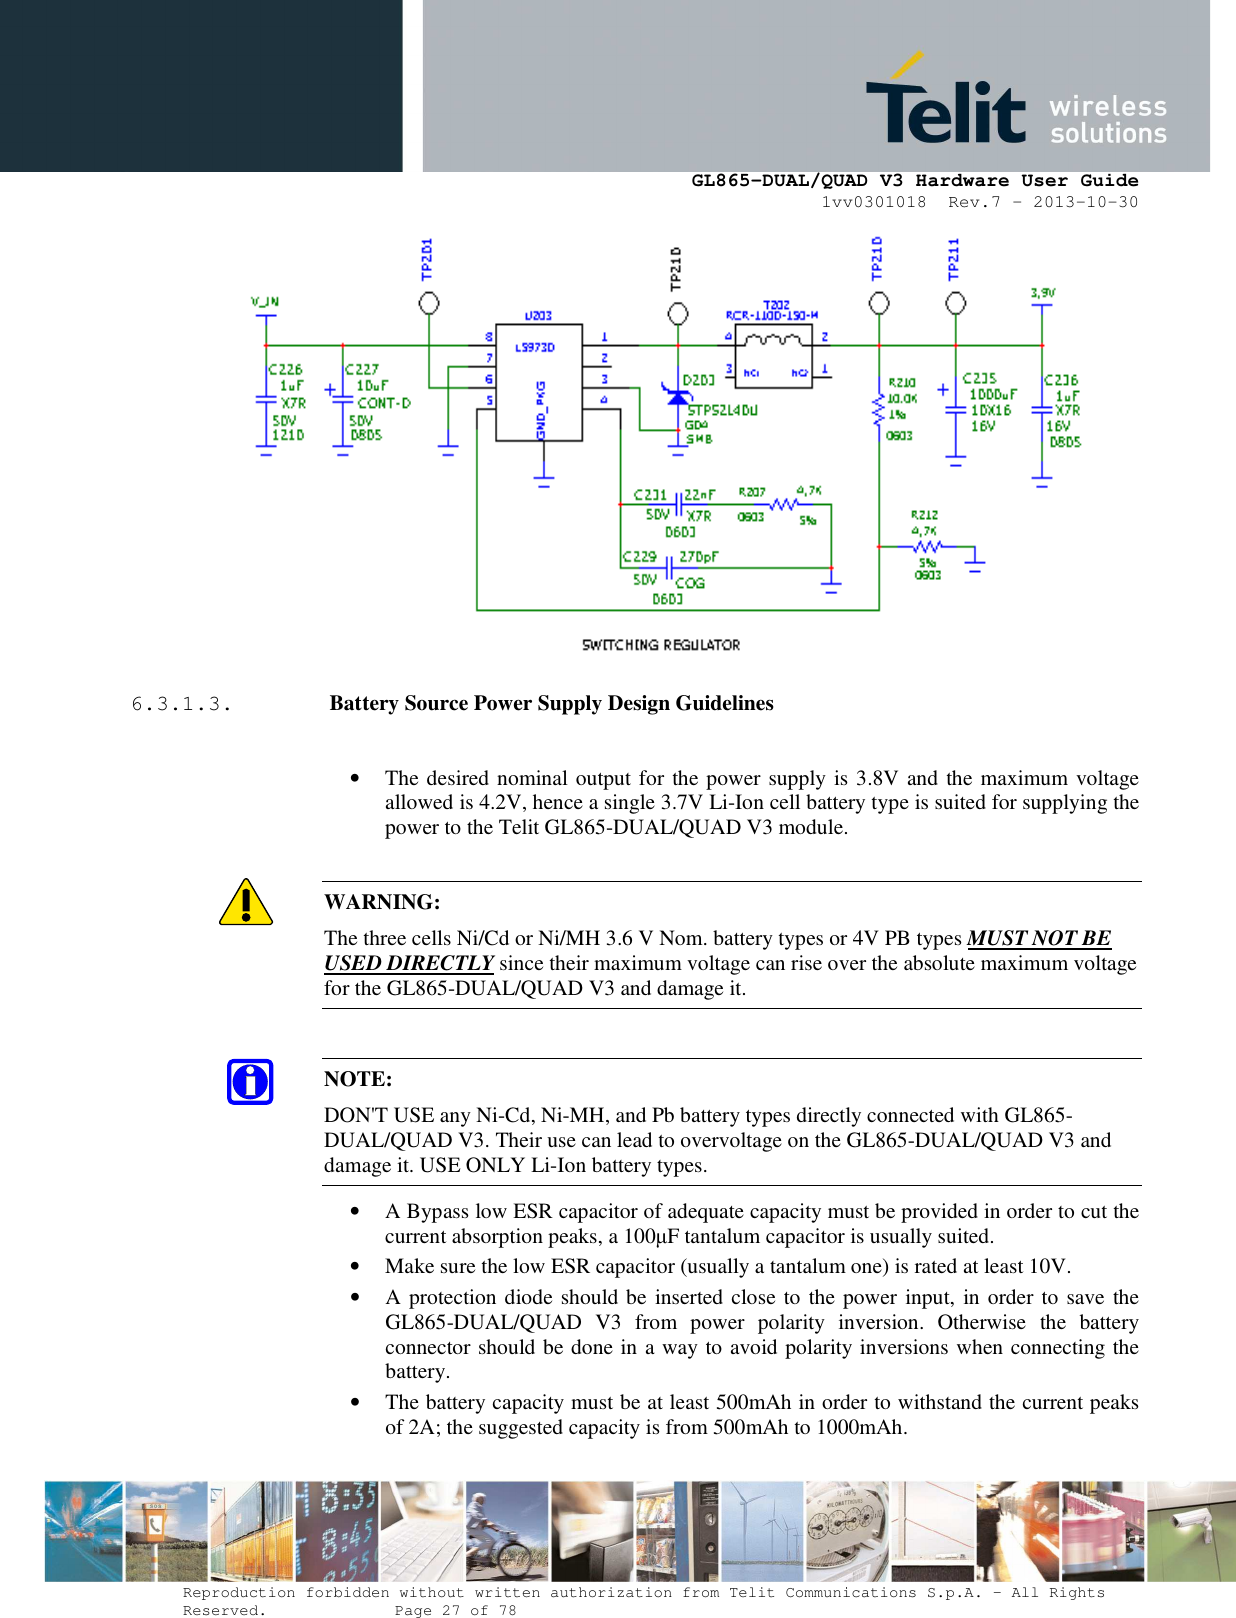      GL865-DUAL/QUAD V3 Hardware User Guide 1vv0301018  Rev.7 – 2013-10-30  Reproduction forbidden without written authorization from Telit Communications S.p.A. - All Rights Reserved.    Page 27 of 78 Mod. 0805 2011-07 Rev.2                   6.3.1.3.  Battery Source Power Supply Design Guidelines  • The desired nominal output for the power supply is 3.8V and the maximum voltage allowed is 4.2V, hence a single 3.7V Li-Ion cell battery type is suited for supplying the power to the Telit GL865-DUAL/QUAD V3 module.  WARNING: The three cells Ni/Cd or Ni/MH 3.6 V Nom. battery types or 4V PB types MUST NOT BE USED DIRECTLY since their maximum voltage can rise over the absolute maximum voltage for the GL865-DUAL/QUAD V3 and damage it.  NOTE: DON&apos;T USE any Ni-Cd, Ni-MH, and Pb battery types directly connected with GL865-DUAL/QUAD V3. Their use can lead to overvoltage on the GL865-DUAL/QUAD V3 and damage it. USE ONLY Li-Ion battery types. • A Bypass low ESR capacitor of adequate capacity must be provided in order to cut the current absorption peaks, a 100µF tantalum capacitor is usually suited. • Make sure the low ESR capacitor (usually a tantalum one) is rated at least 10V. • A protection diode should be inserted close to the power input, in order to save the GL865-DUAL/QUAD  V3  from  power  polarity  inversion.  Otherwise  the  battery connector should be done in a way to avoid polarity inversions when connecting the battery. • The battery capacity must be at least 500mAh in order to withstand the current peaks of 2A; the suggested capacity is from 500mAh to 1000mAh. 